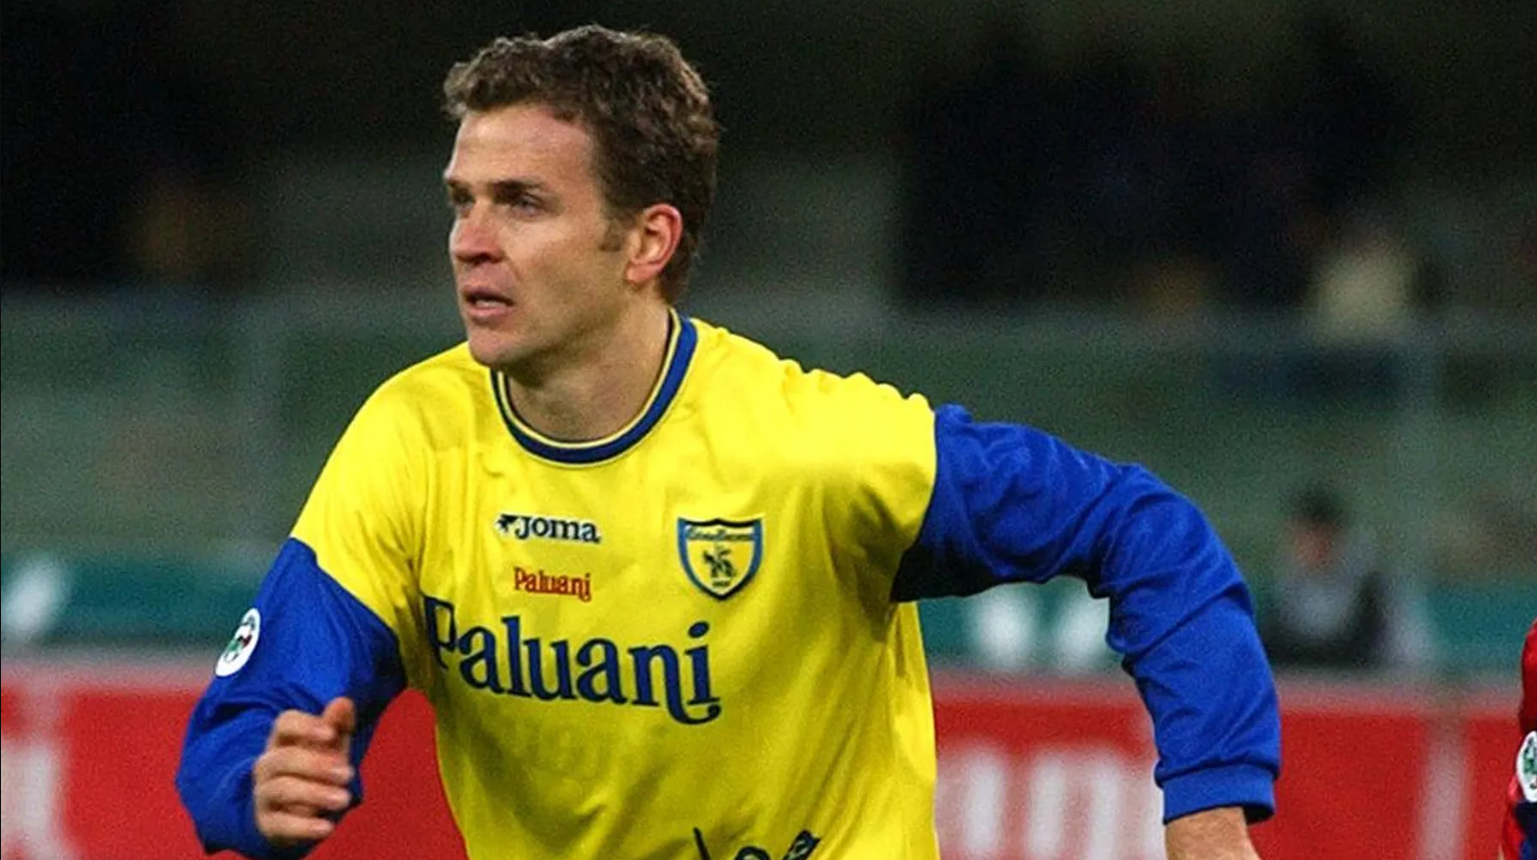 The cult transfer of Oliver Bierhoff and Chievo led to a perfect football match. This is the story of two of Italian football's cult figures